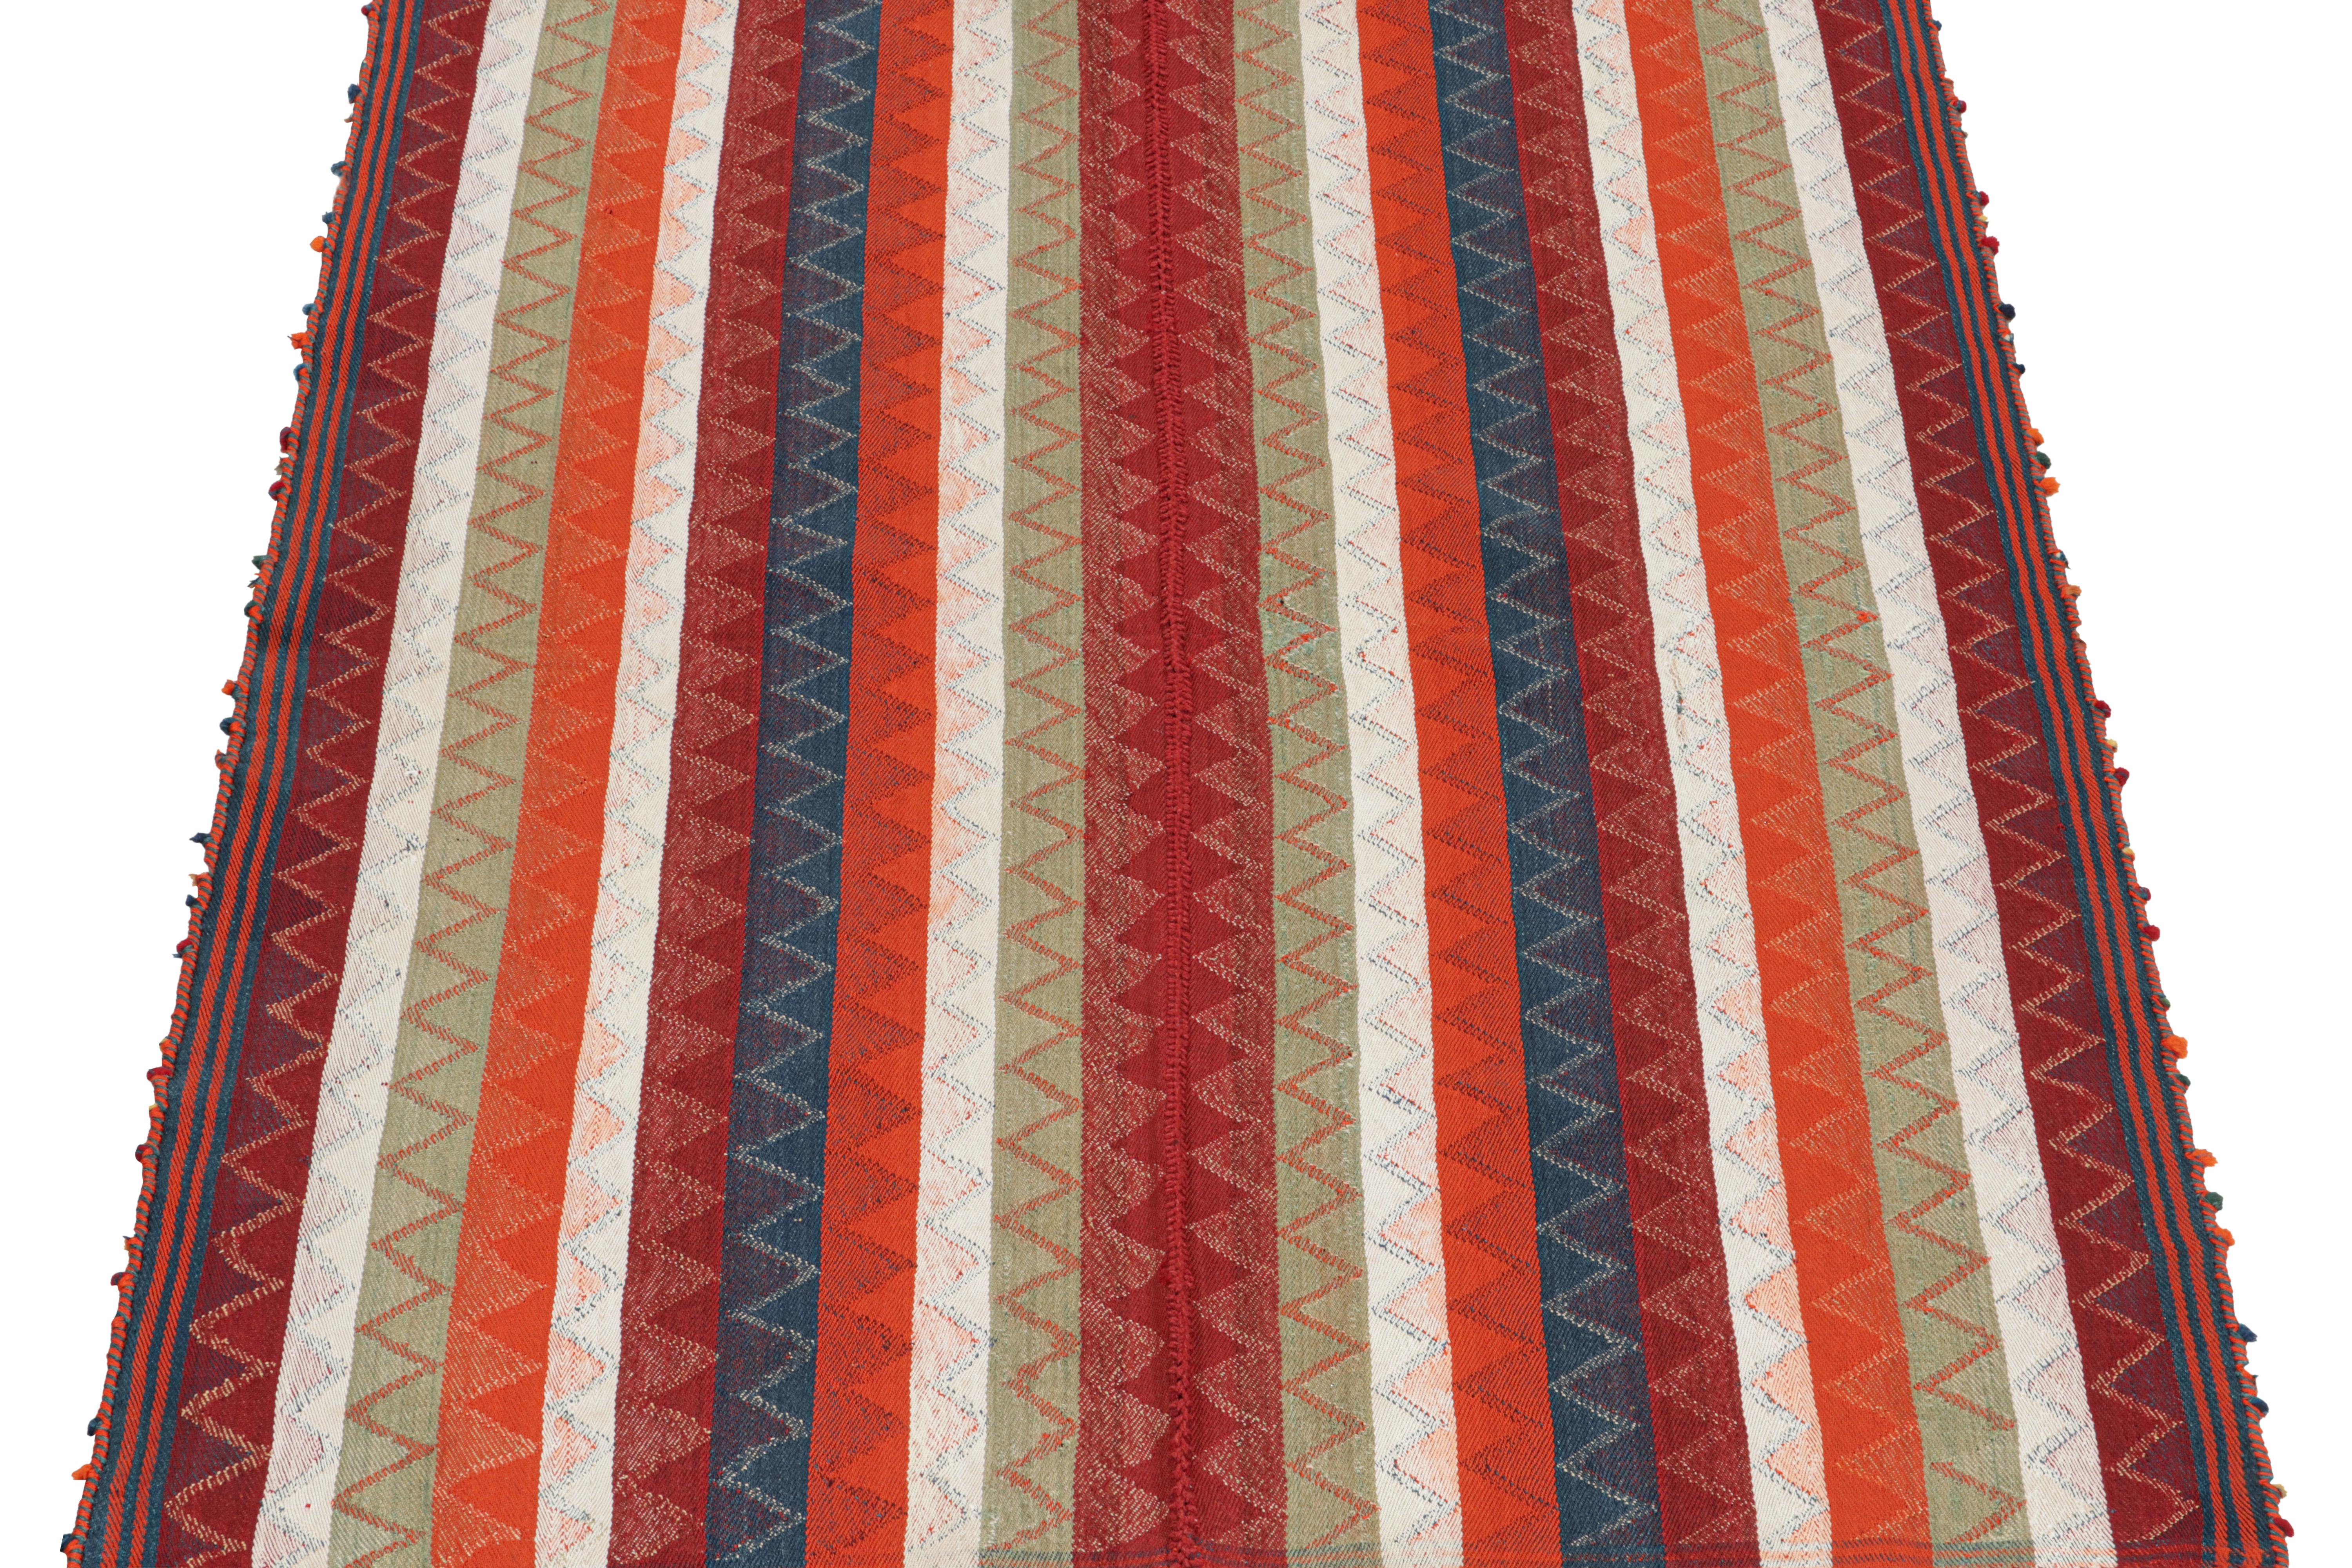 This vintage 5x7 Persian tribal kilim is handwoven in wool, and originates circa 1950-1960.

This design remarks the panel-weaving technique, in which tribal weavers combine multiple pieces into a larger Kilim. Its colorway is polychromatic, but